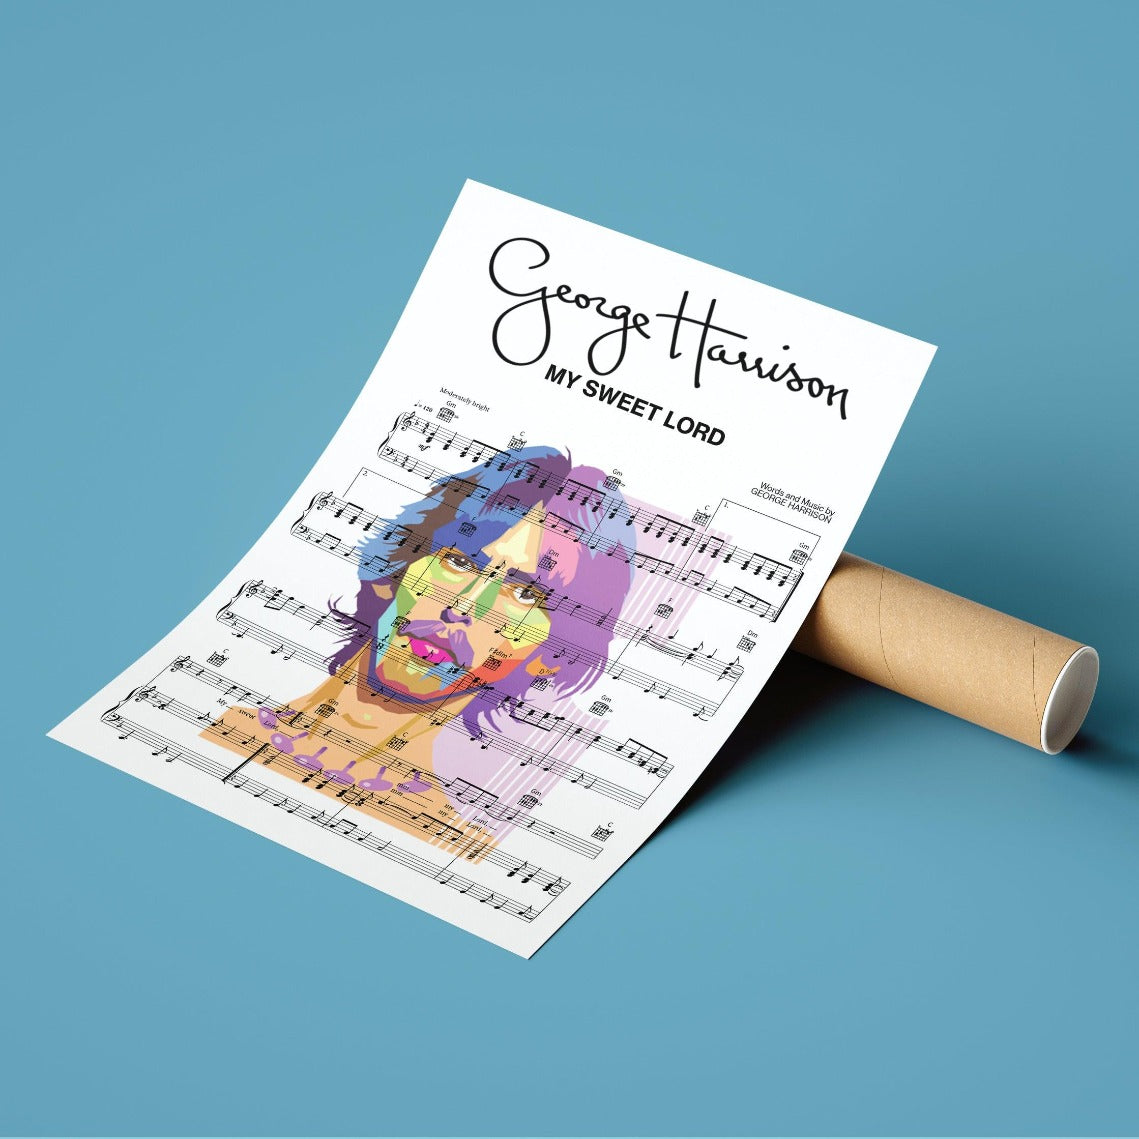 Give your walls some love with this personalized George Harrison - My Sweet Lord poster. What could be more personal than printing your favorite song lyrics onto a piece of art? This beautiful print would make the perfect addition to any music lover's home.